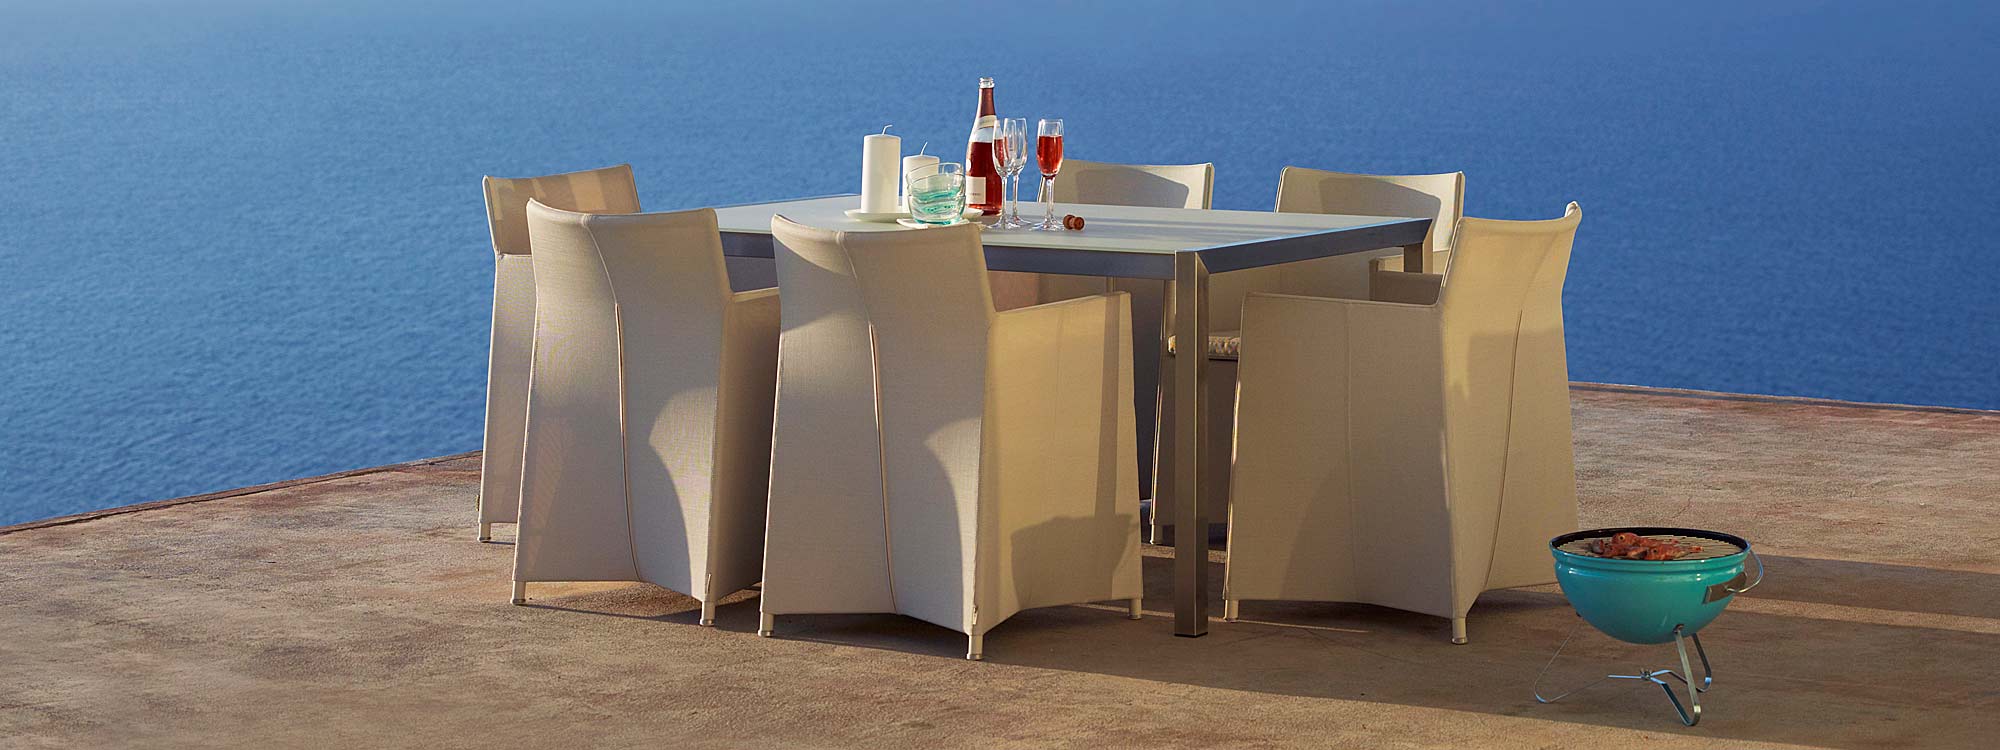 Image of Diamond outdoor dining chairs and Cane-line stainless steel dining table